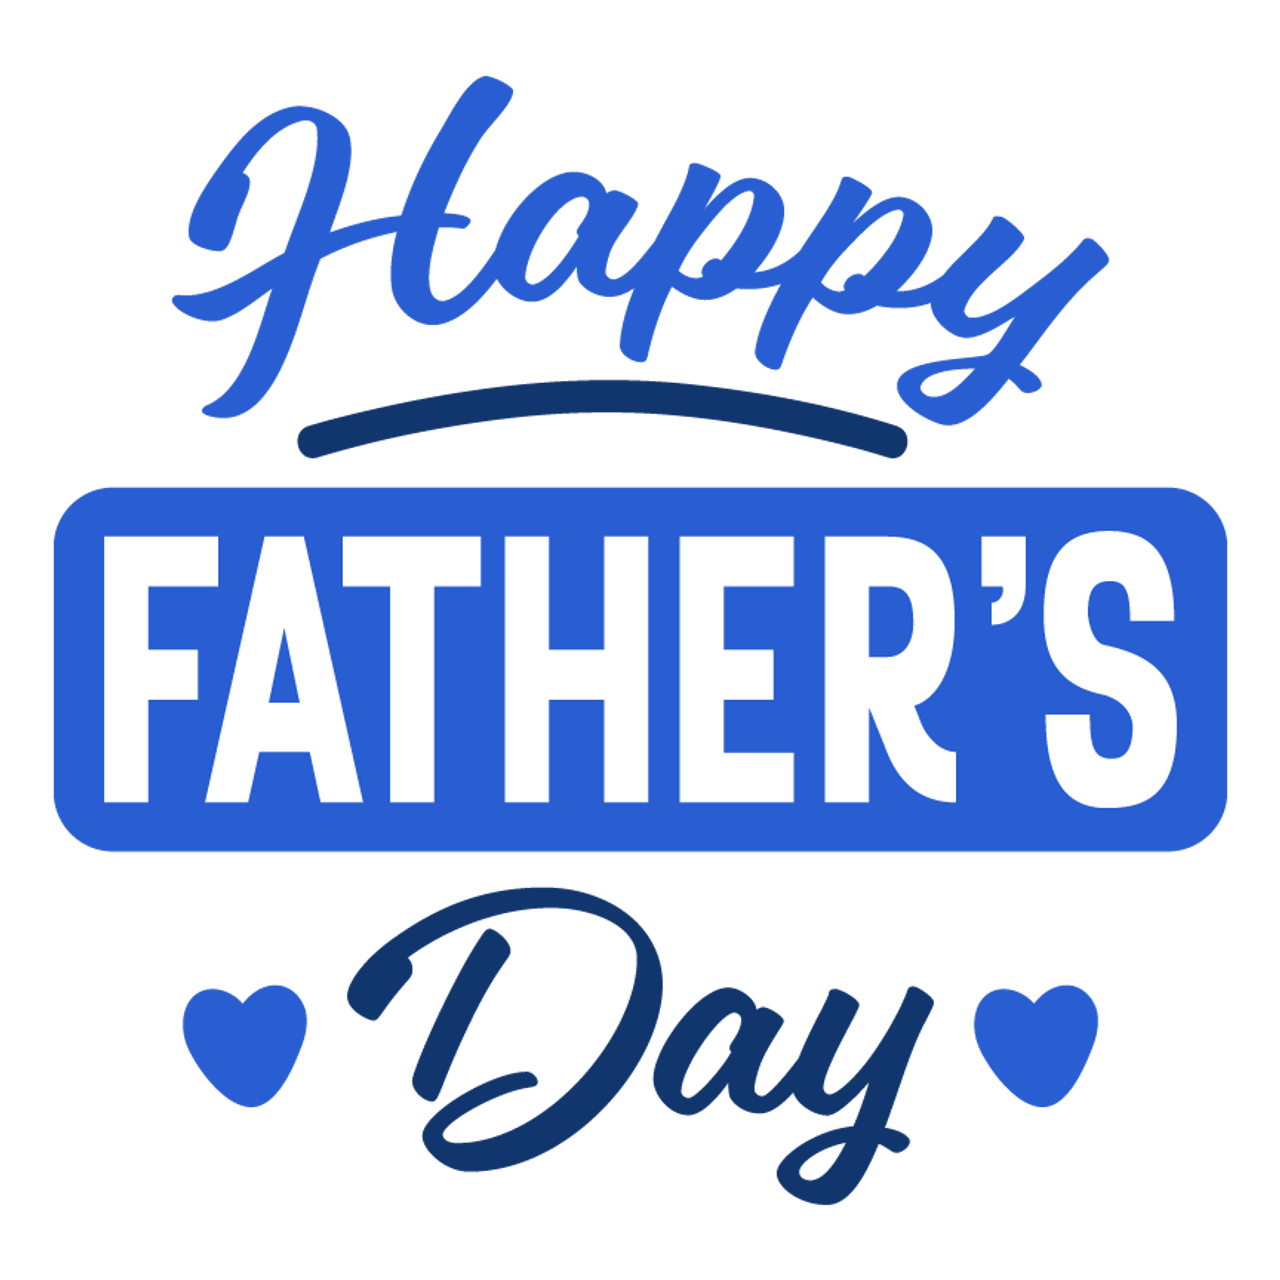 Download Happy Fathers Day SVG v2 - SVG EPS PNG DXF Cut Files for Cricut and Silhouette Cameo by ...